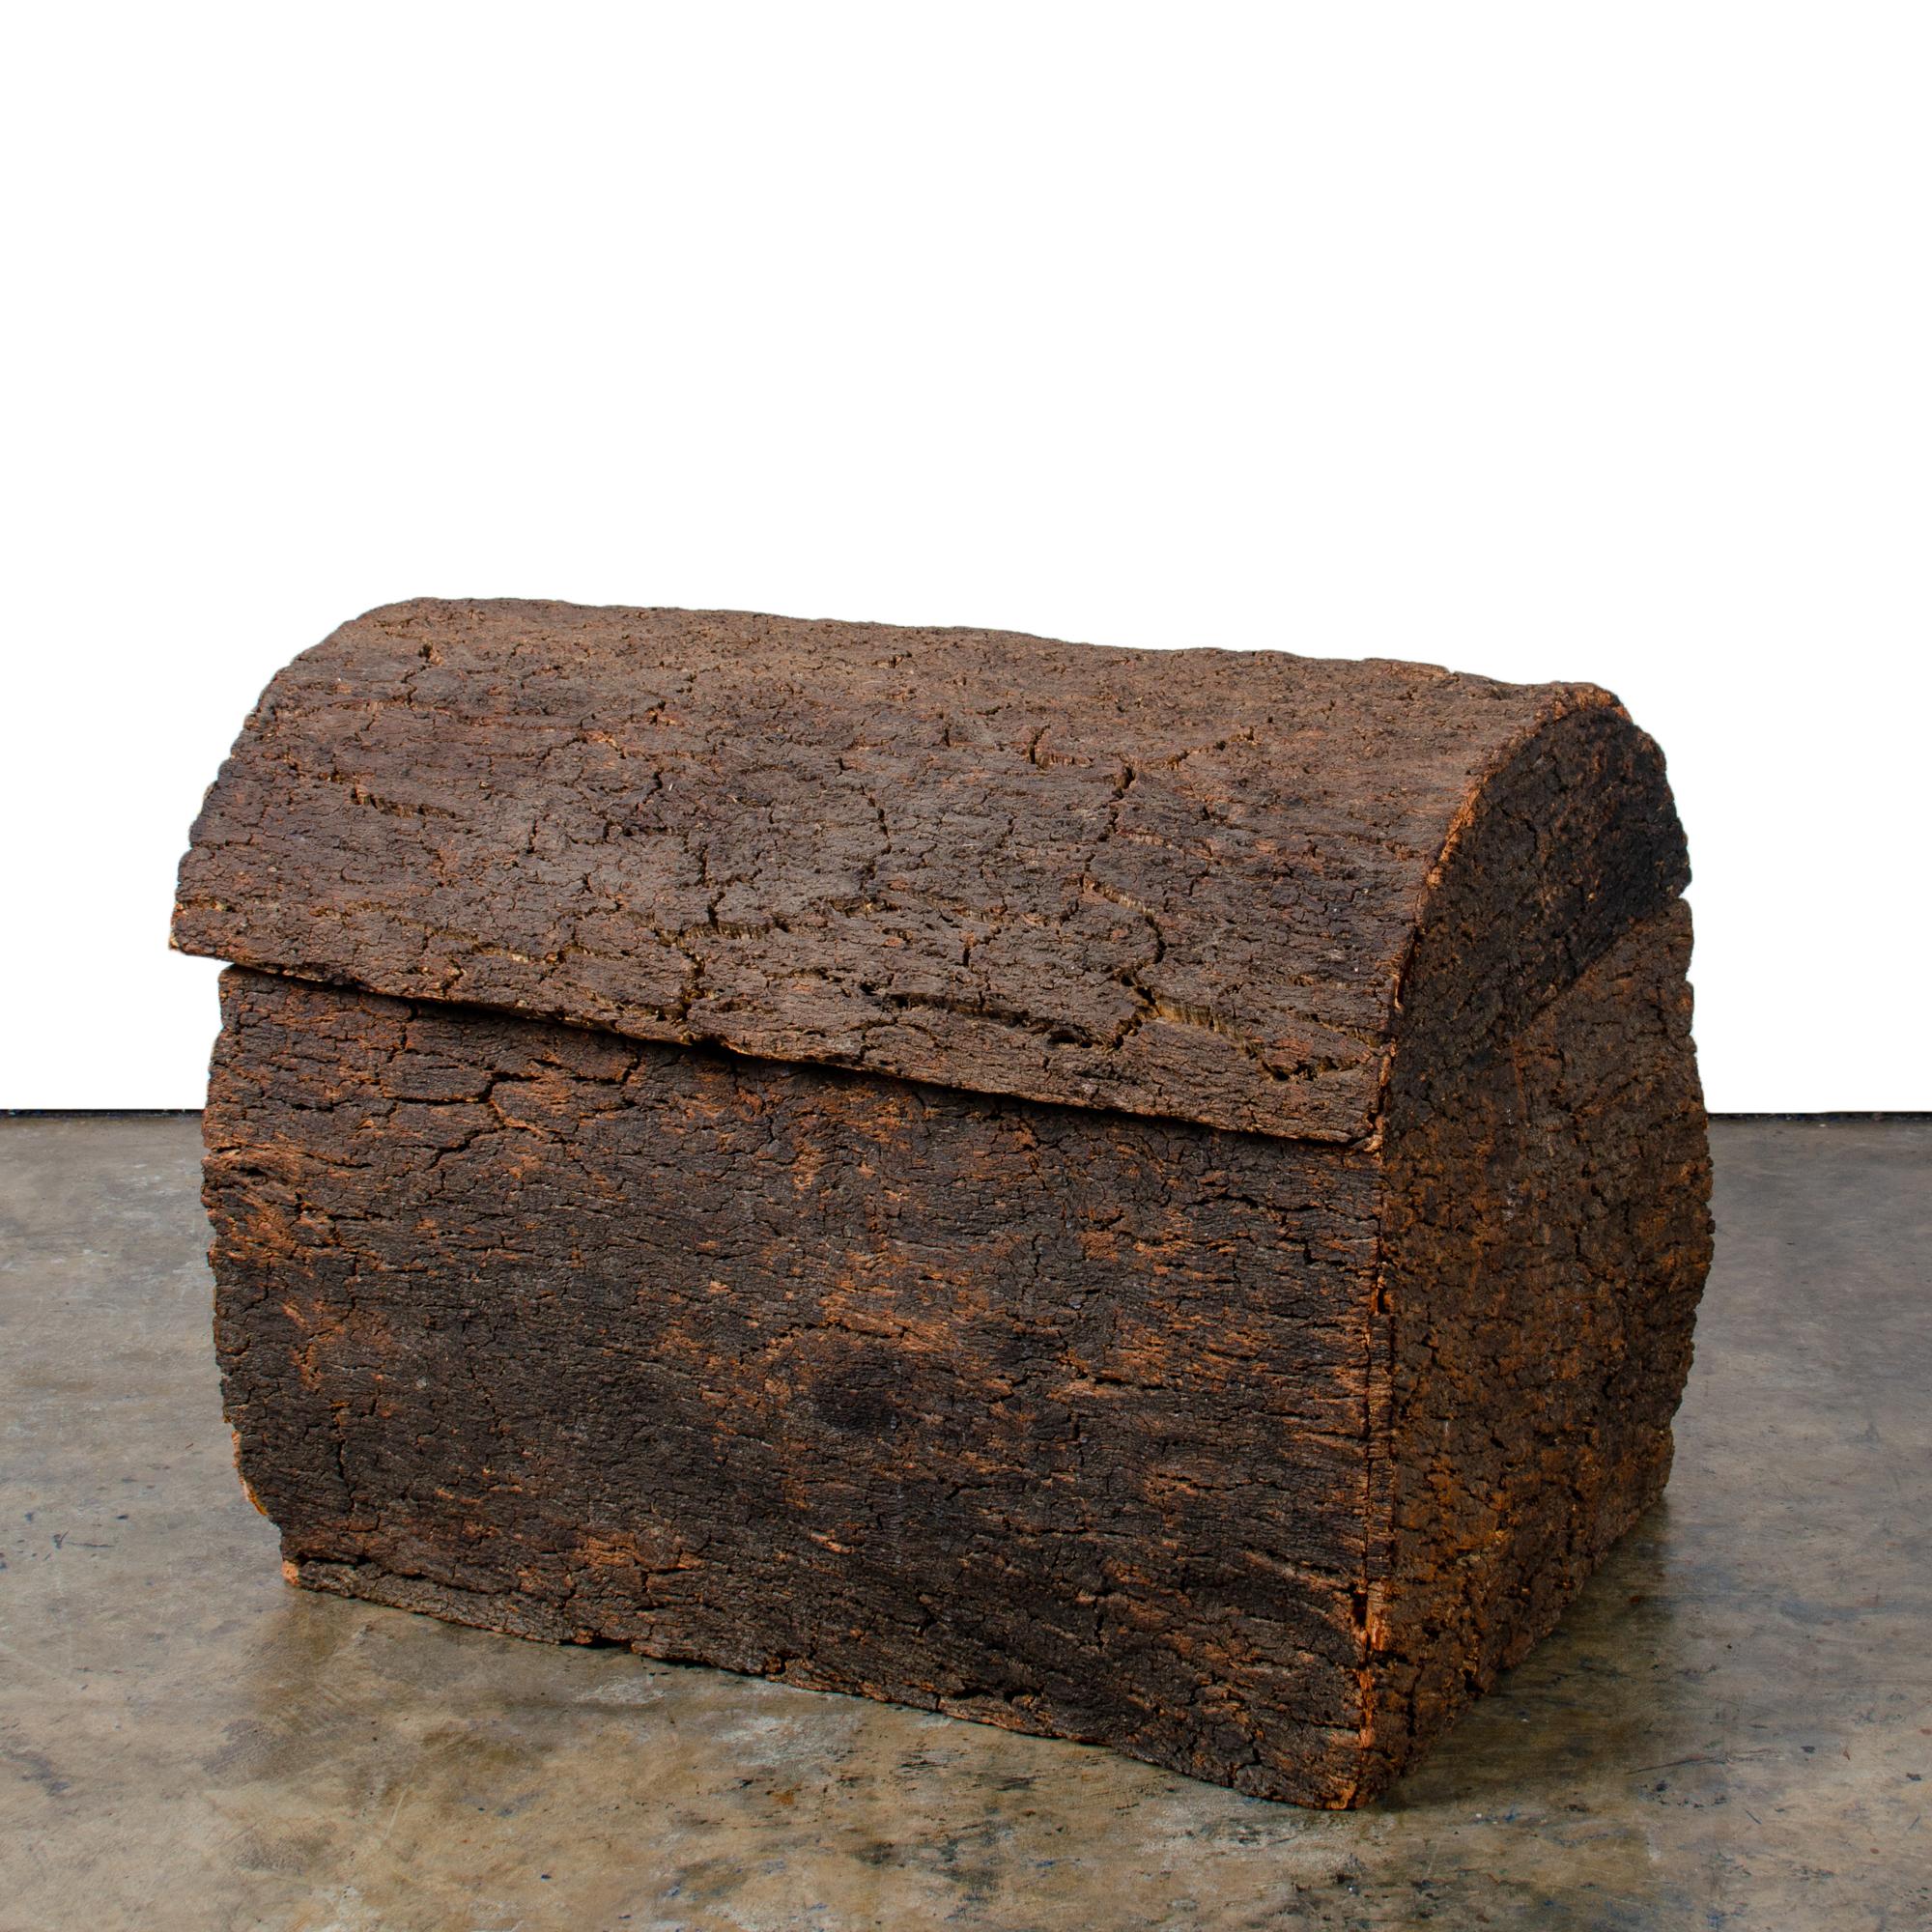 A unique vintage trunk made from the bark of a Cork Oak tree.

28 inches wide by 20 inches deep by 20 inches tall
